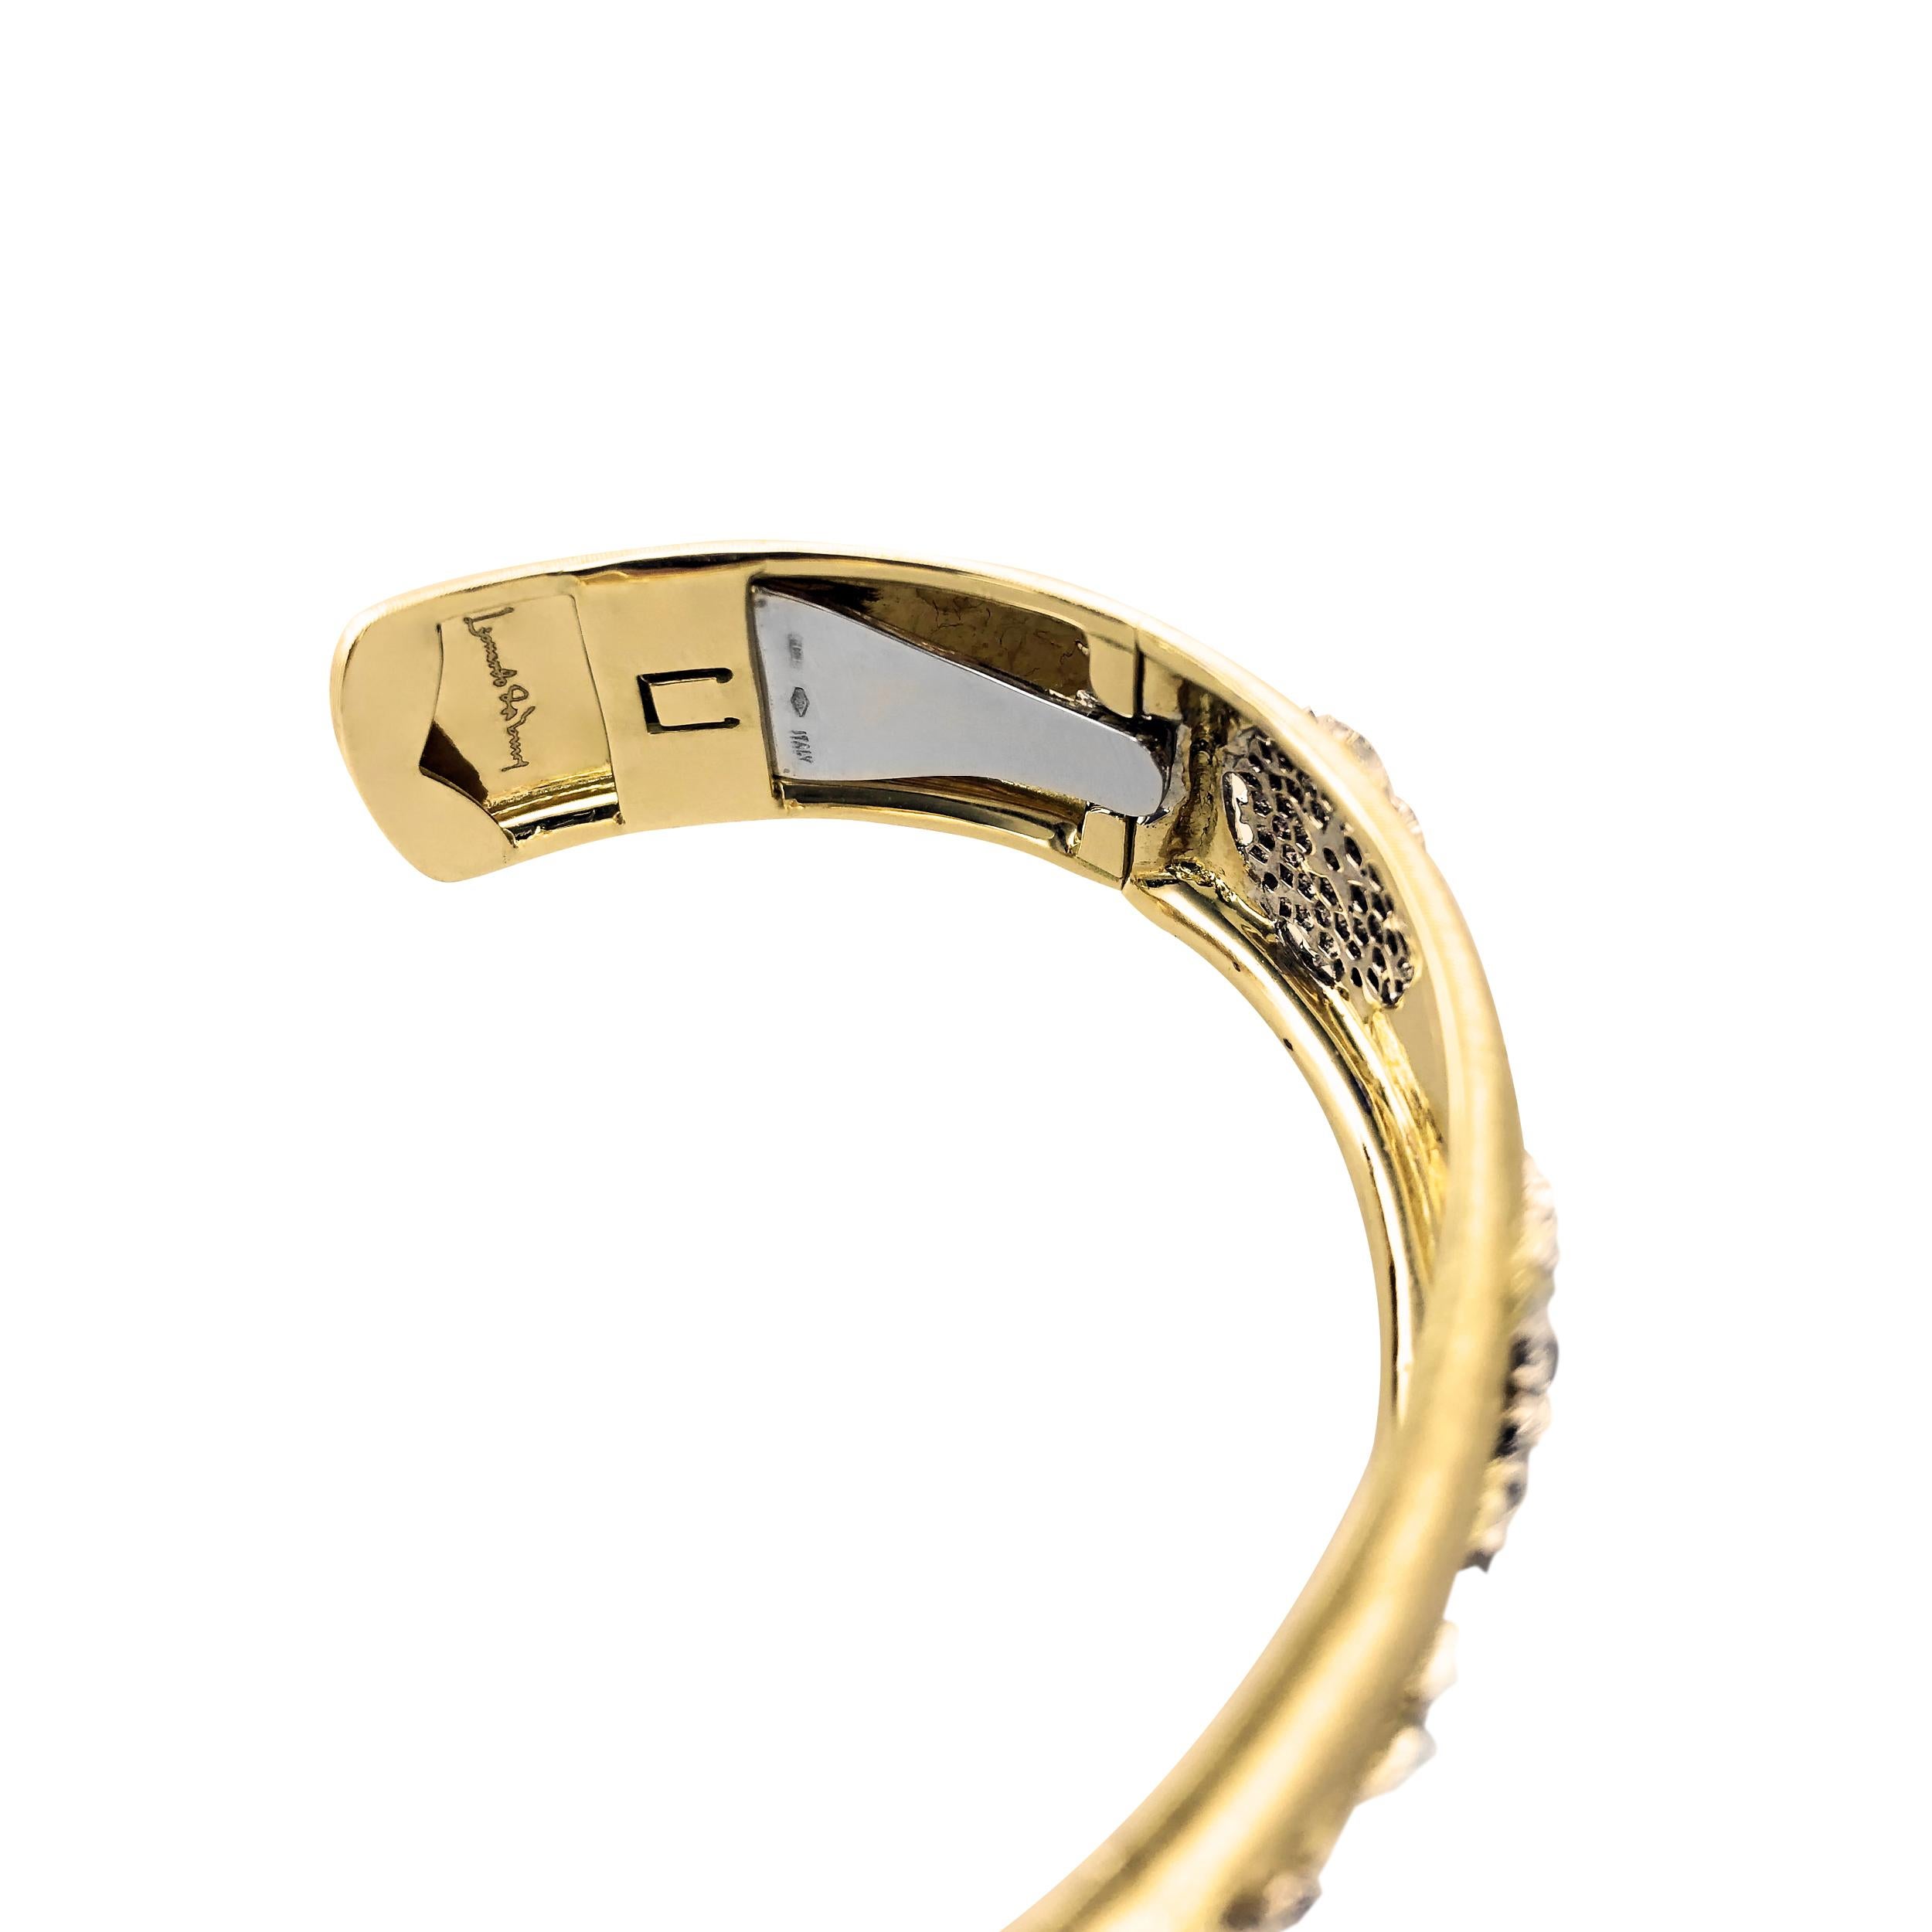 This 18Kt yellow Gold Ginevra cuff bangle is sprinkled with 0.47 Carats of Leonardo da Vinci Cut diamonds.

The matted Yellow Gold cuff bangle is uniquely designed with 5 large pentagons of white gold. Each pentagon is delicately crafted with mini